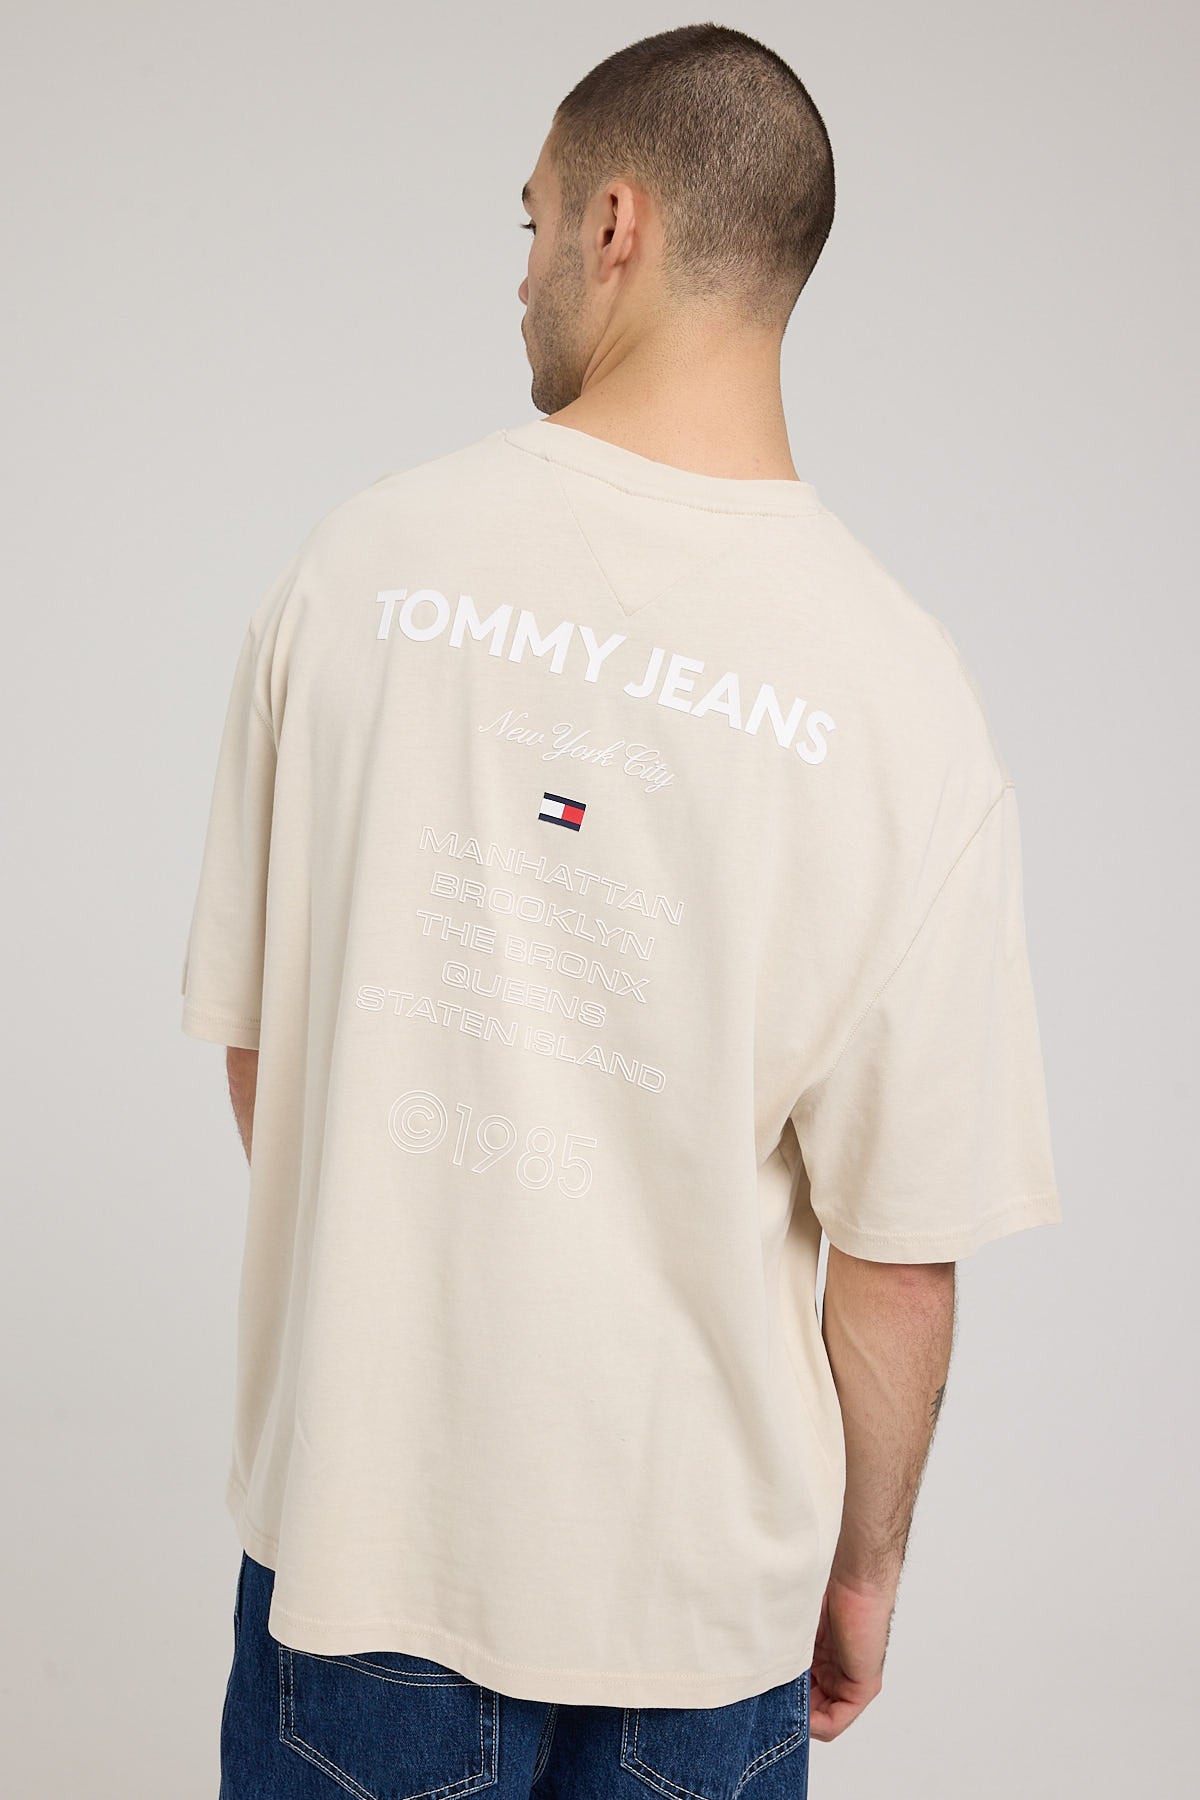 Tommy Jeans Oversized TJ NYC 1985 Cities Tee Newsprint